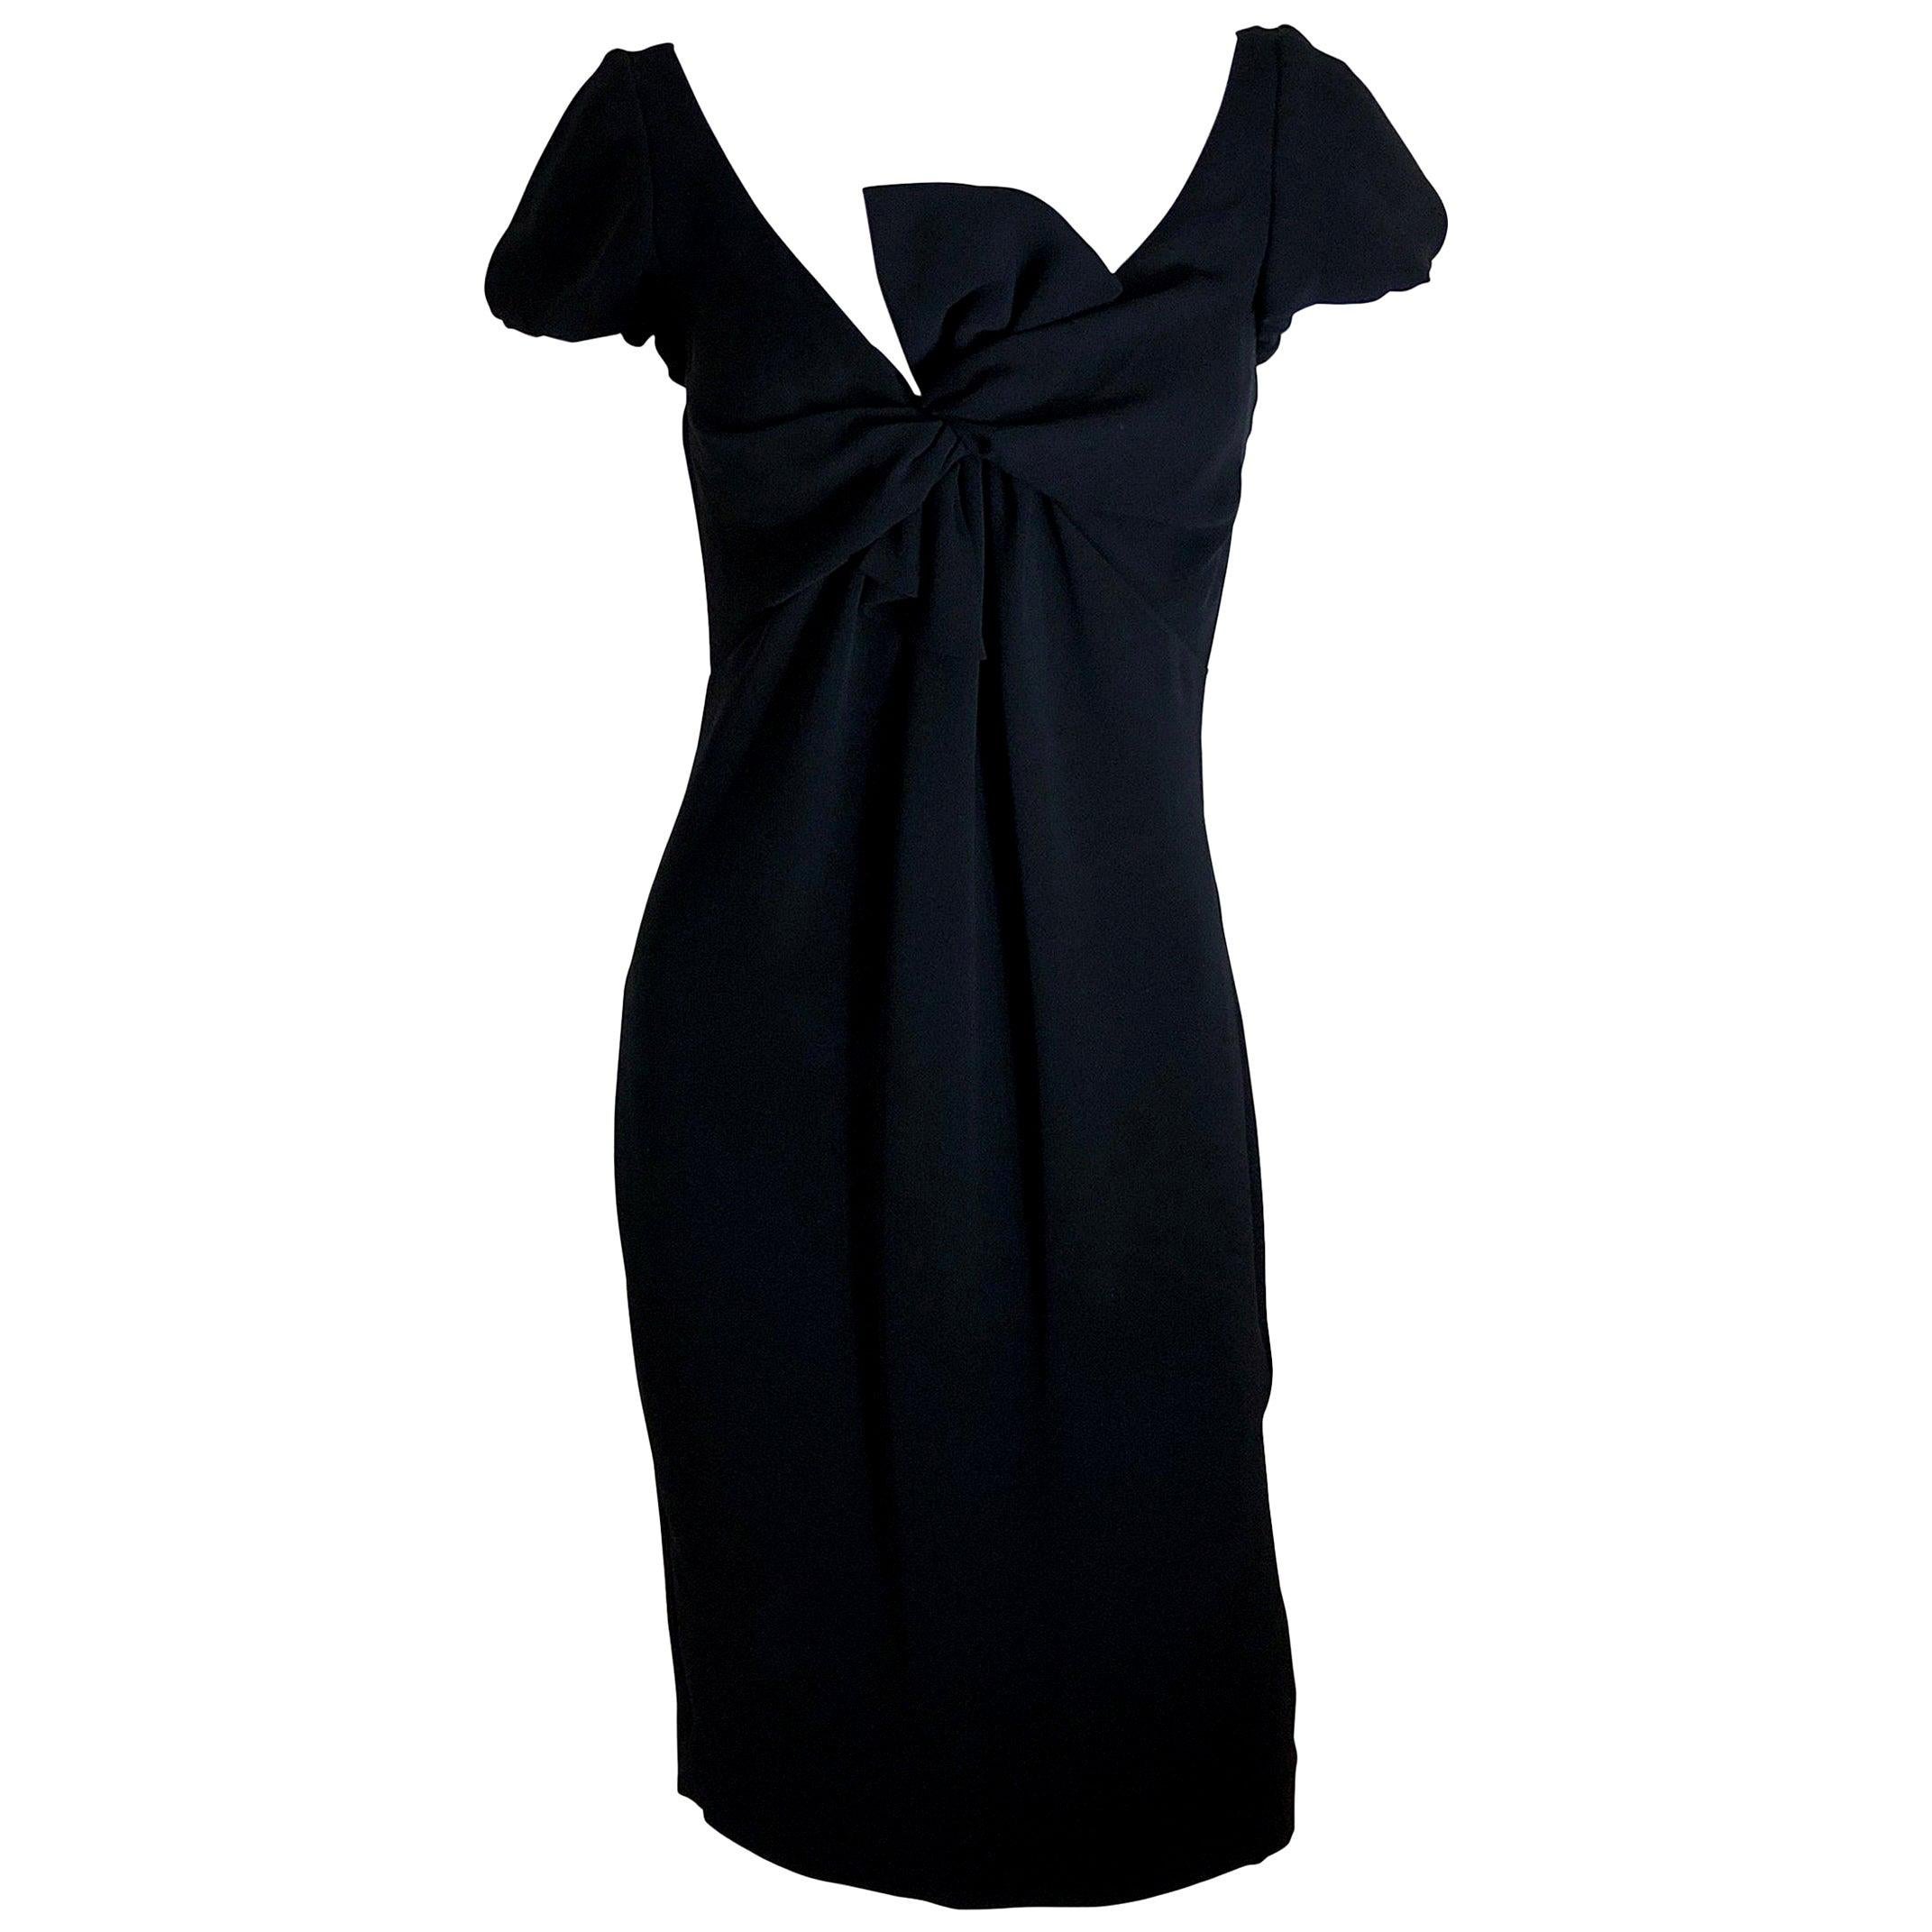 Make:  Giambattista Valli
Place of Manufacture:  Italy
Size:  42/S
Color:  Black
Condition:  One once.  Almost new.
Style:  Black cocktail dress of soft sueded silk with plunging neckline framed by a faux loos black bow and princess sleeve.  Dress